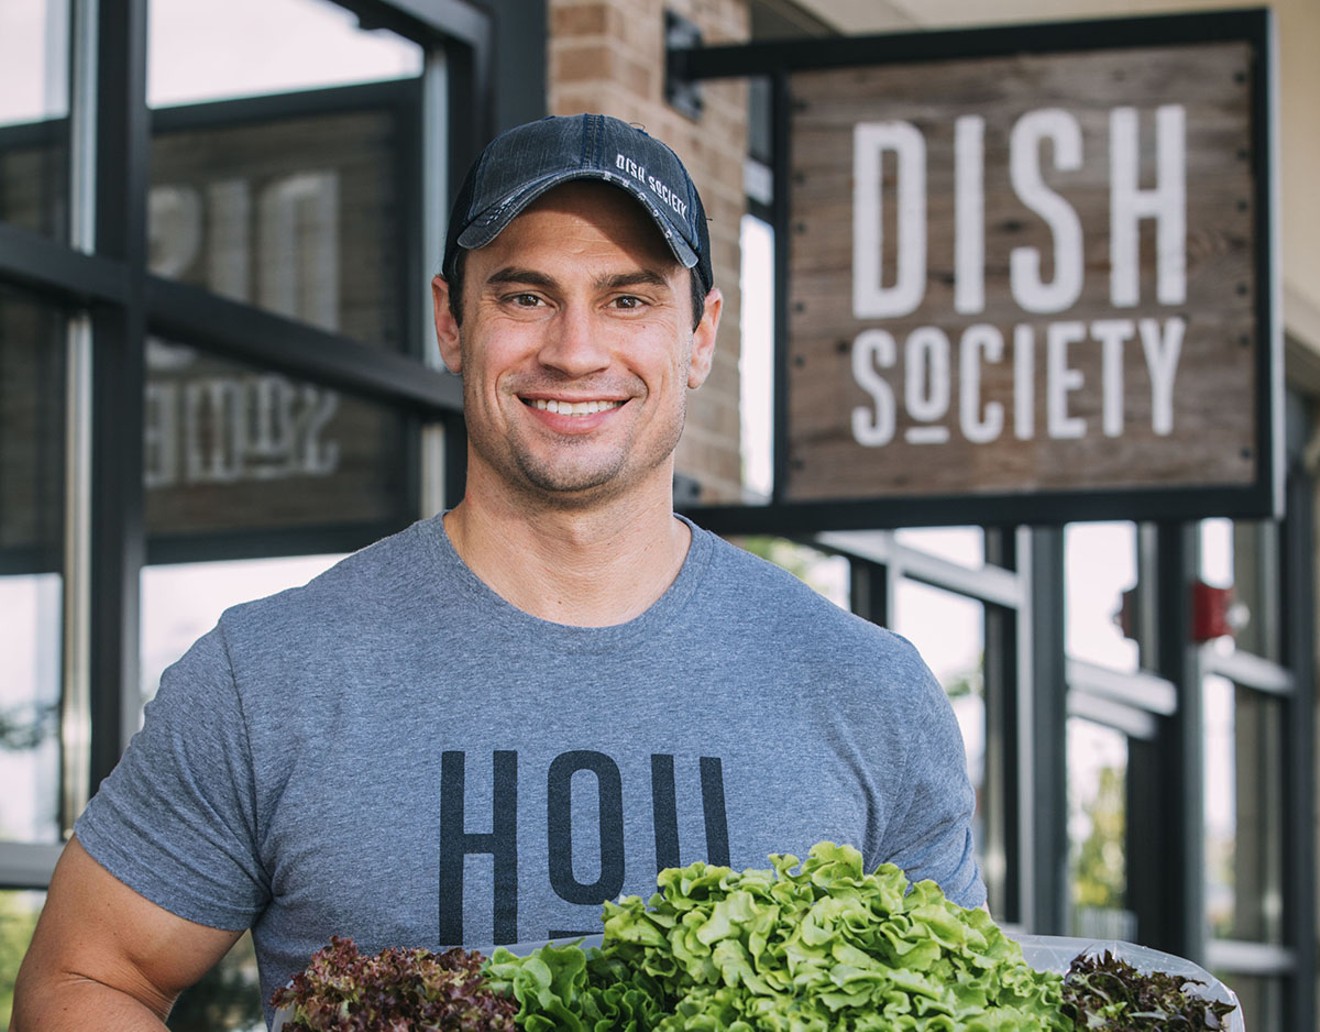 Aaron Lyons, founder and owner of Dish Society.